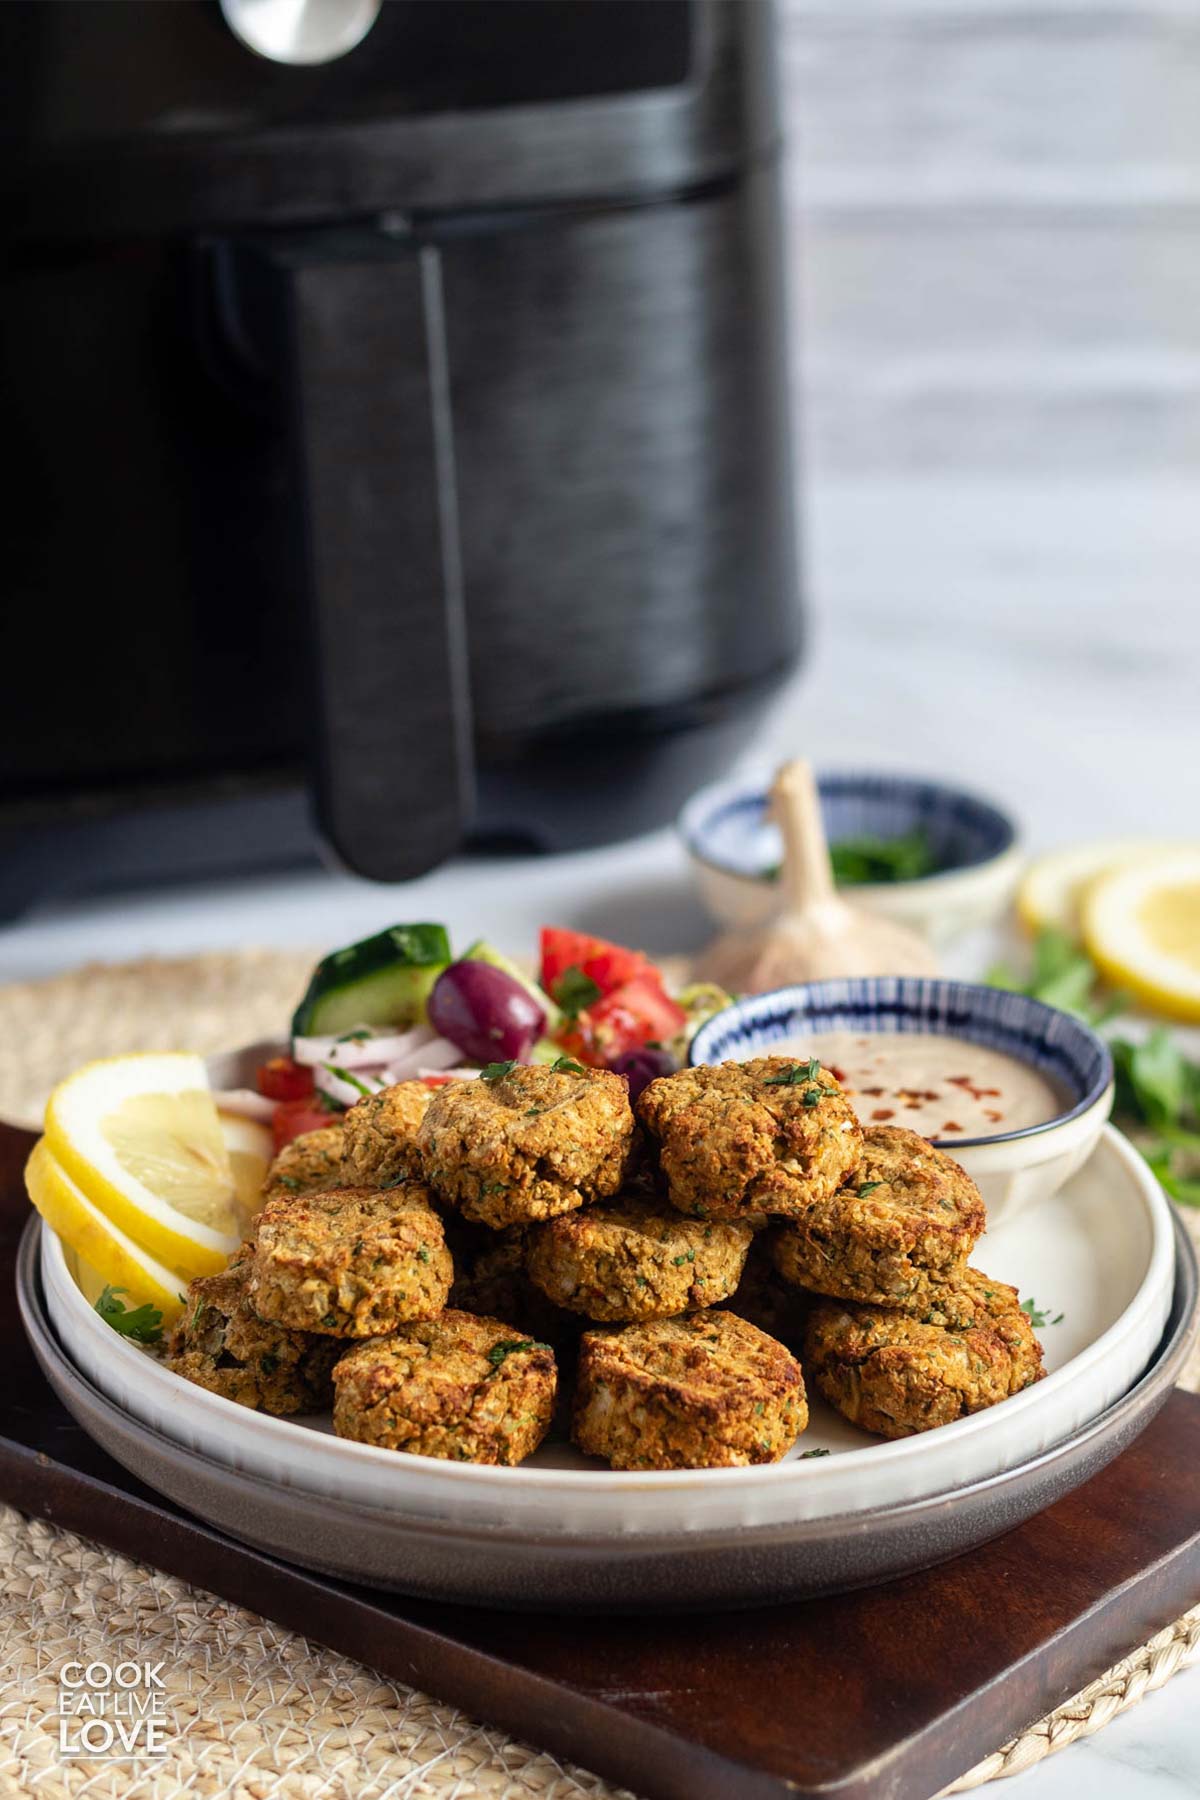 Falafel on a plate with an air fryer in the background.